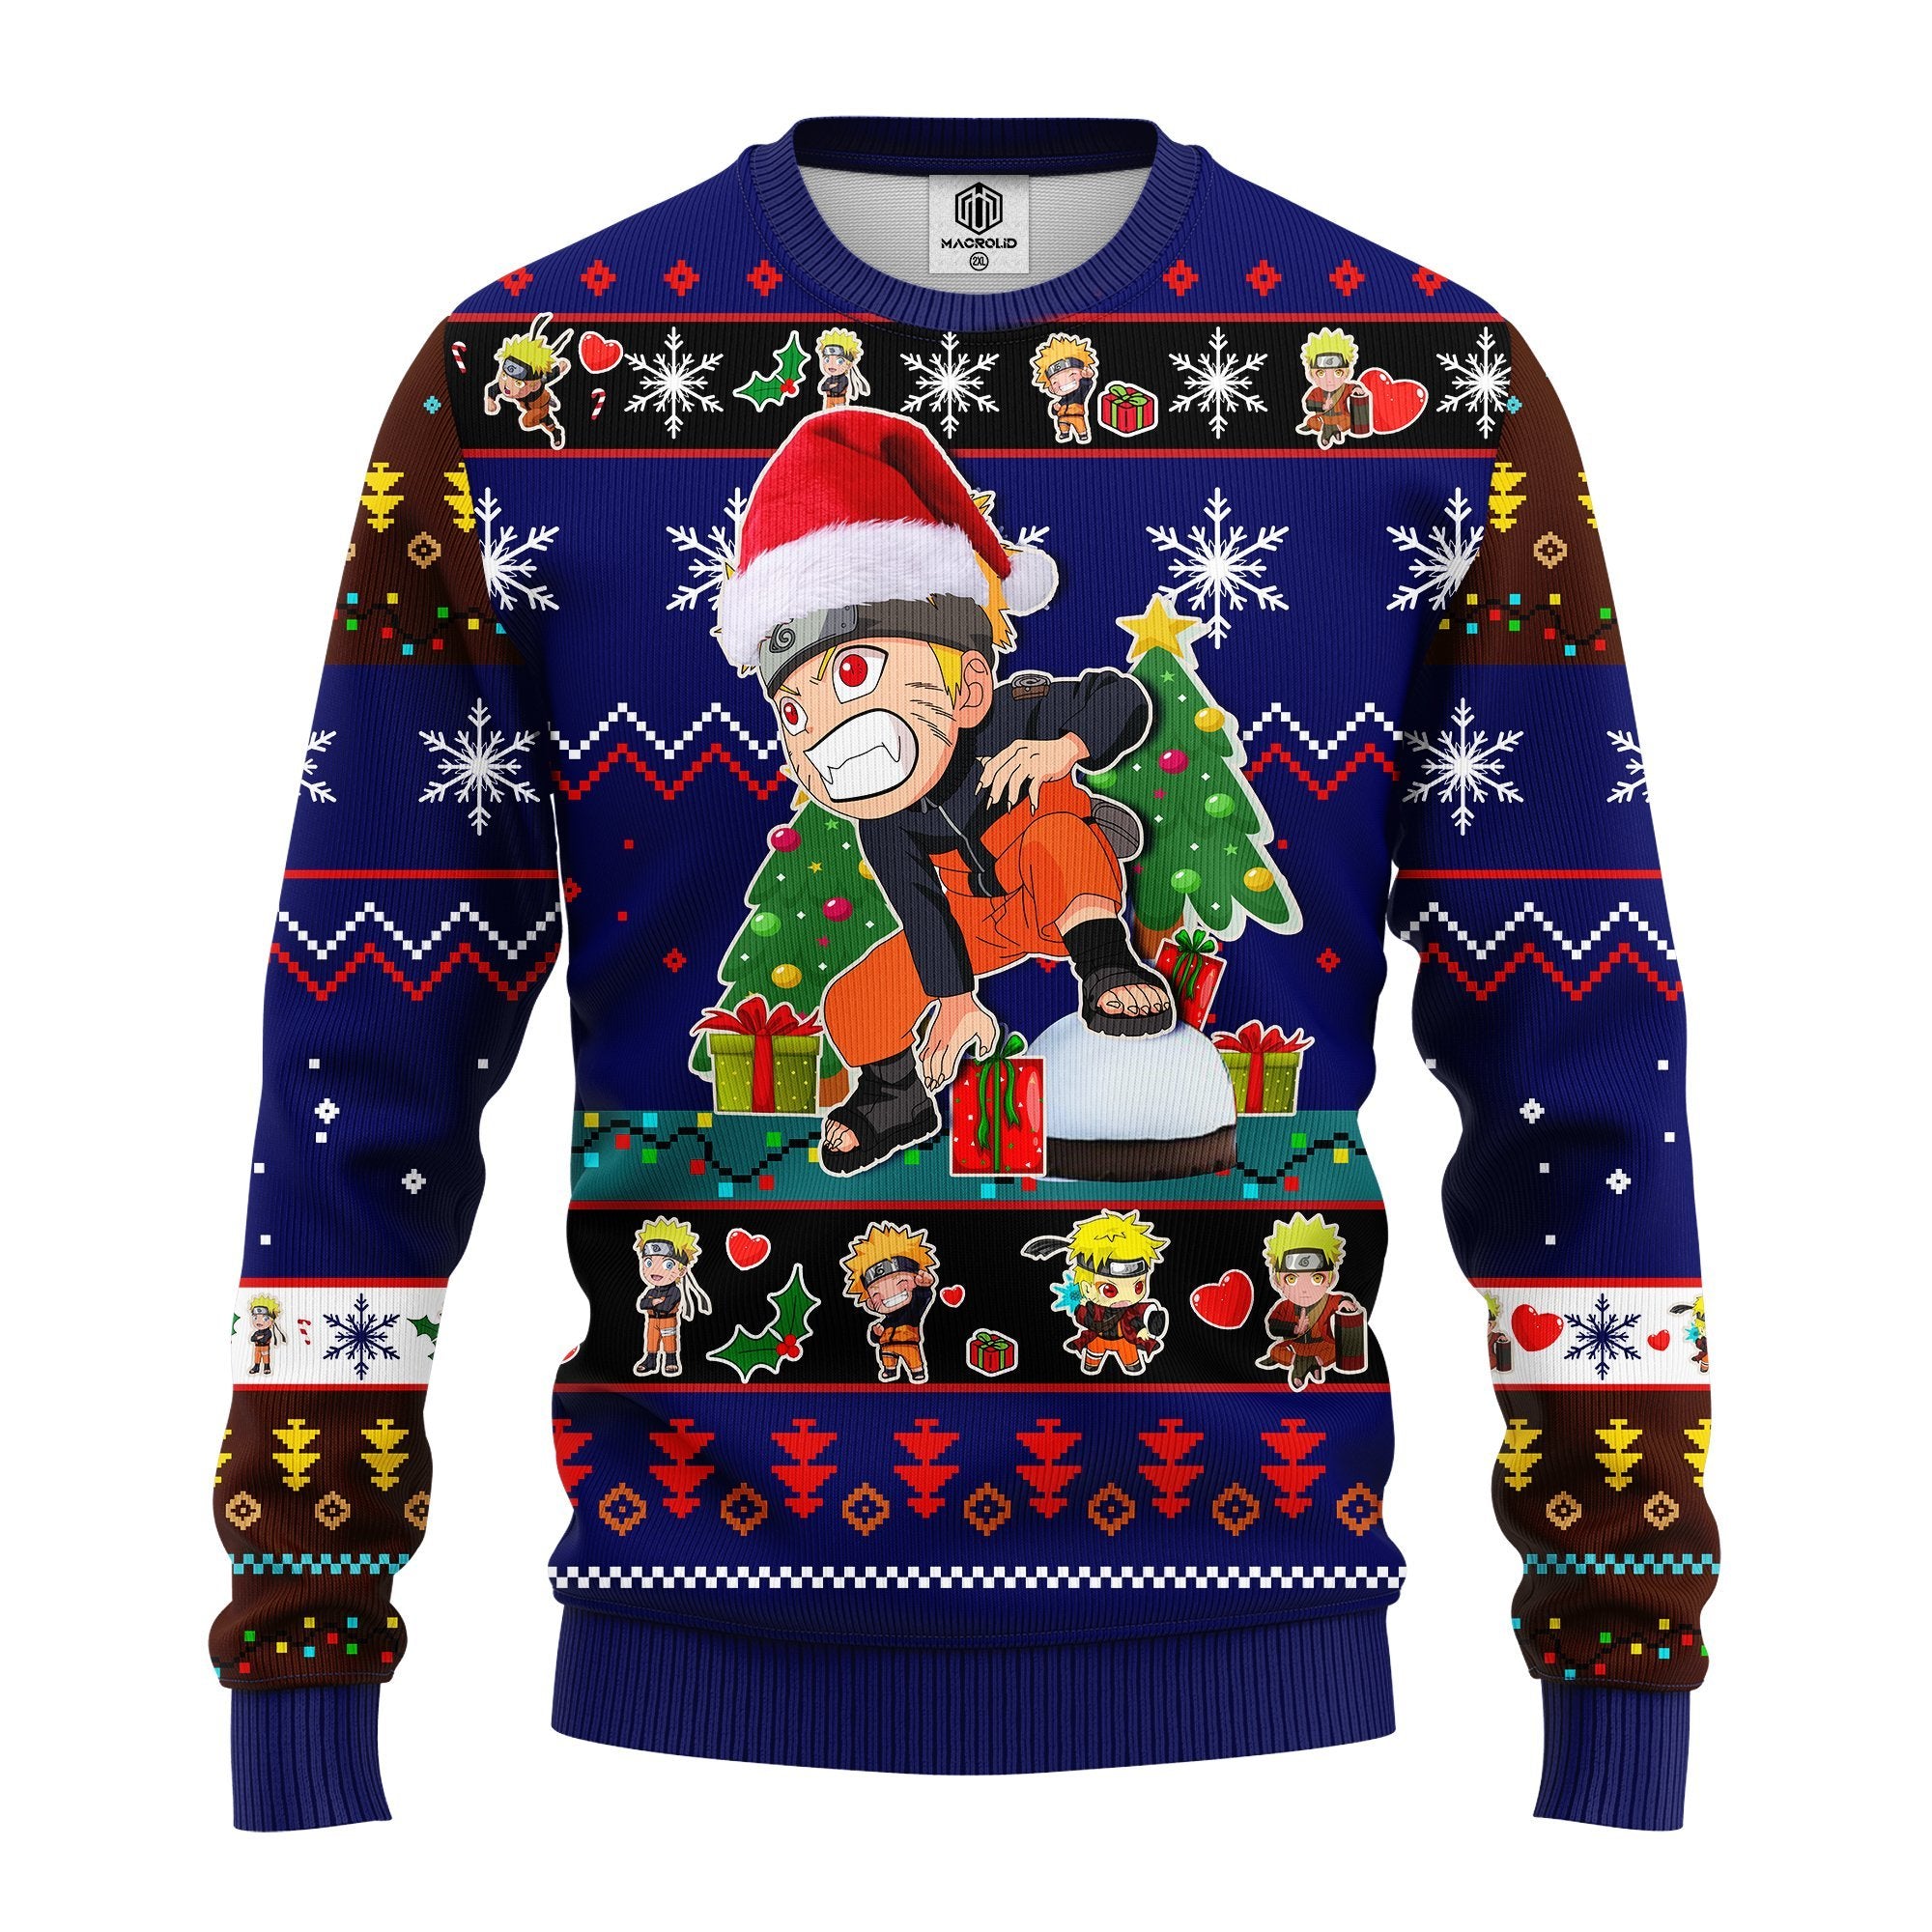 Naruto Kid Ugly Christmas Sweater Brown Blue 1 Amazing Gift Idea Thanksgiving Gift